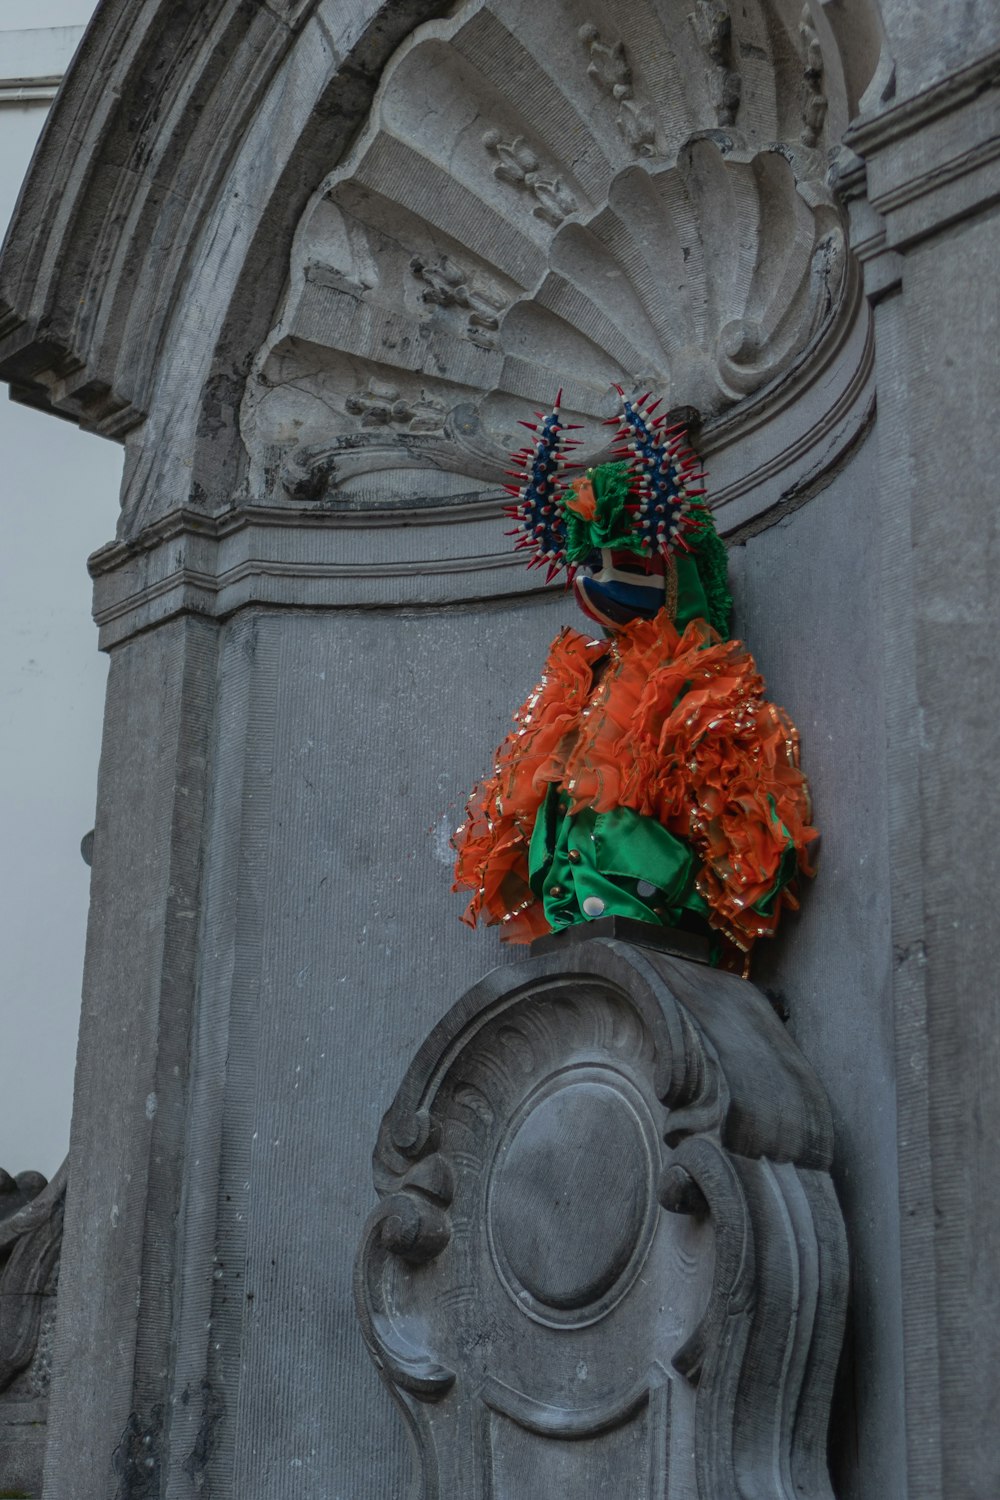 a statue of a woman with a green headdress